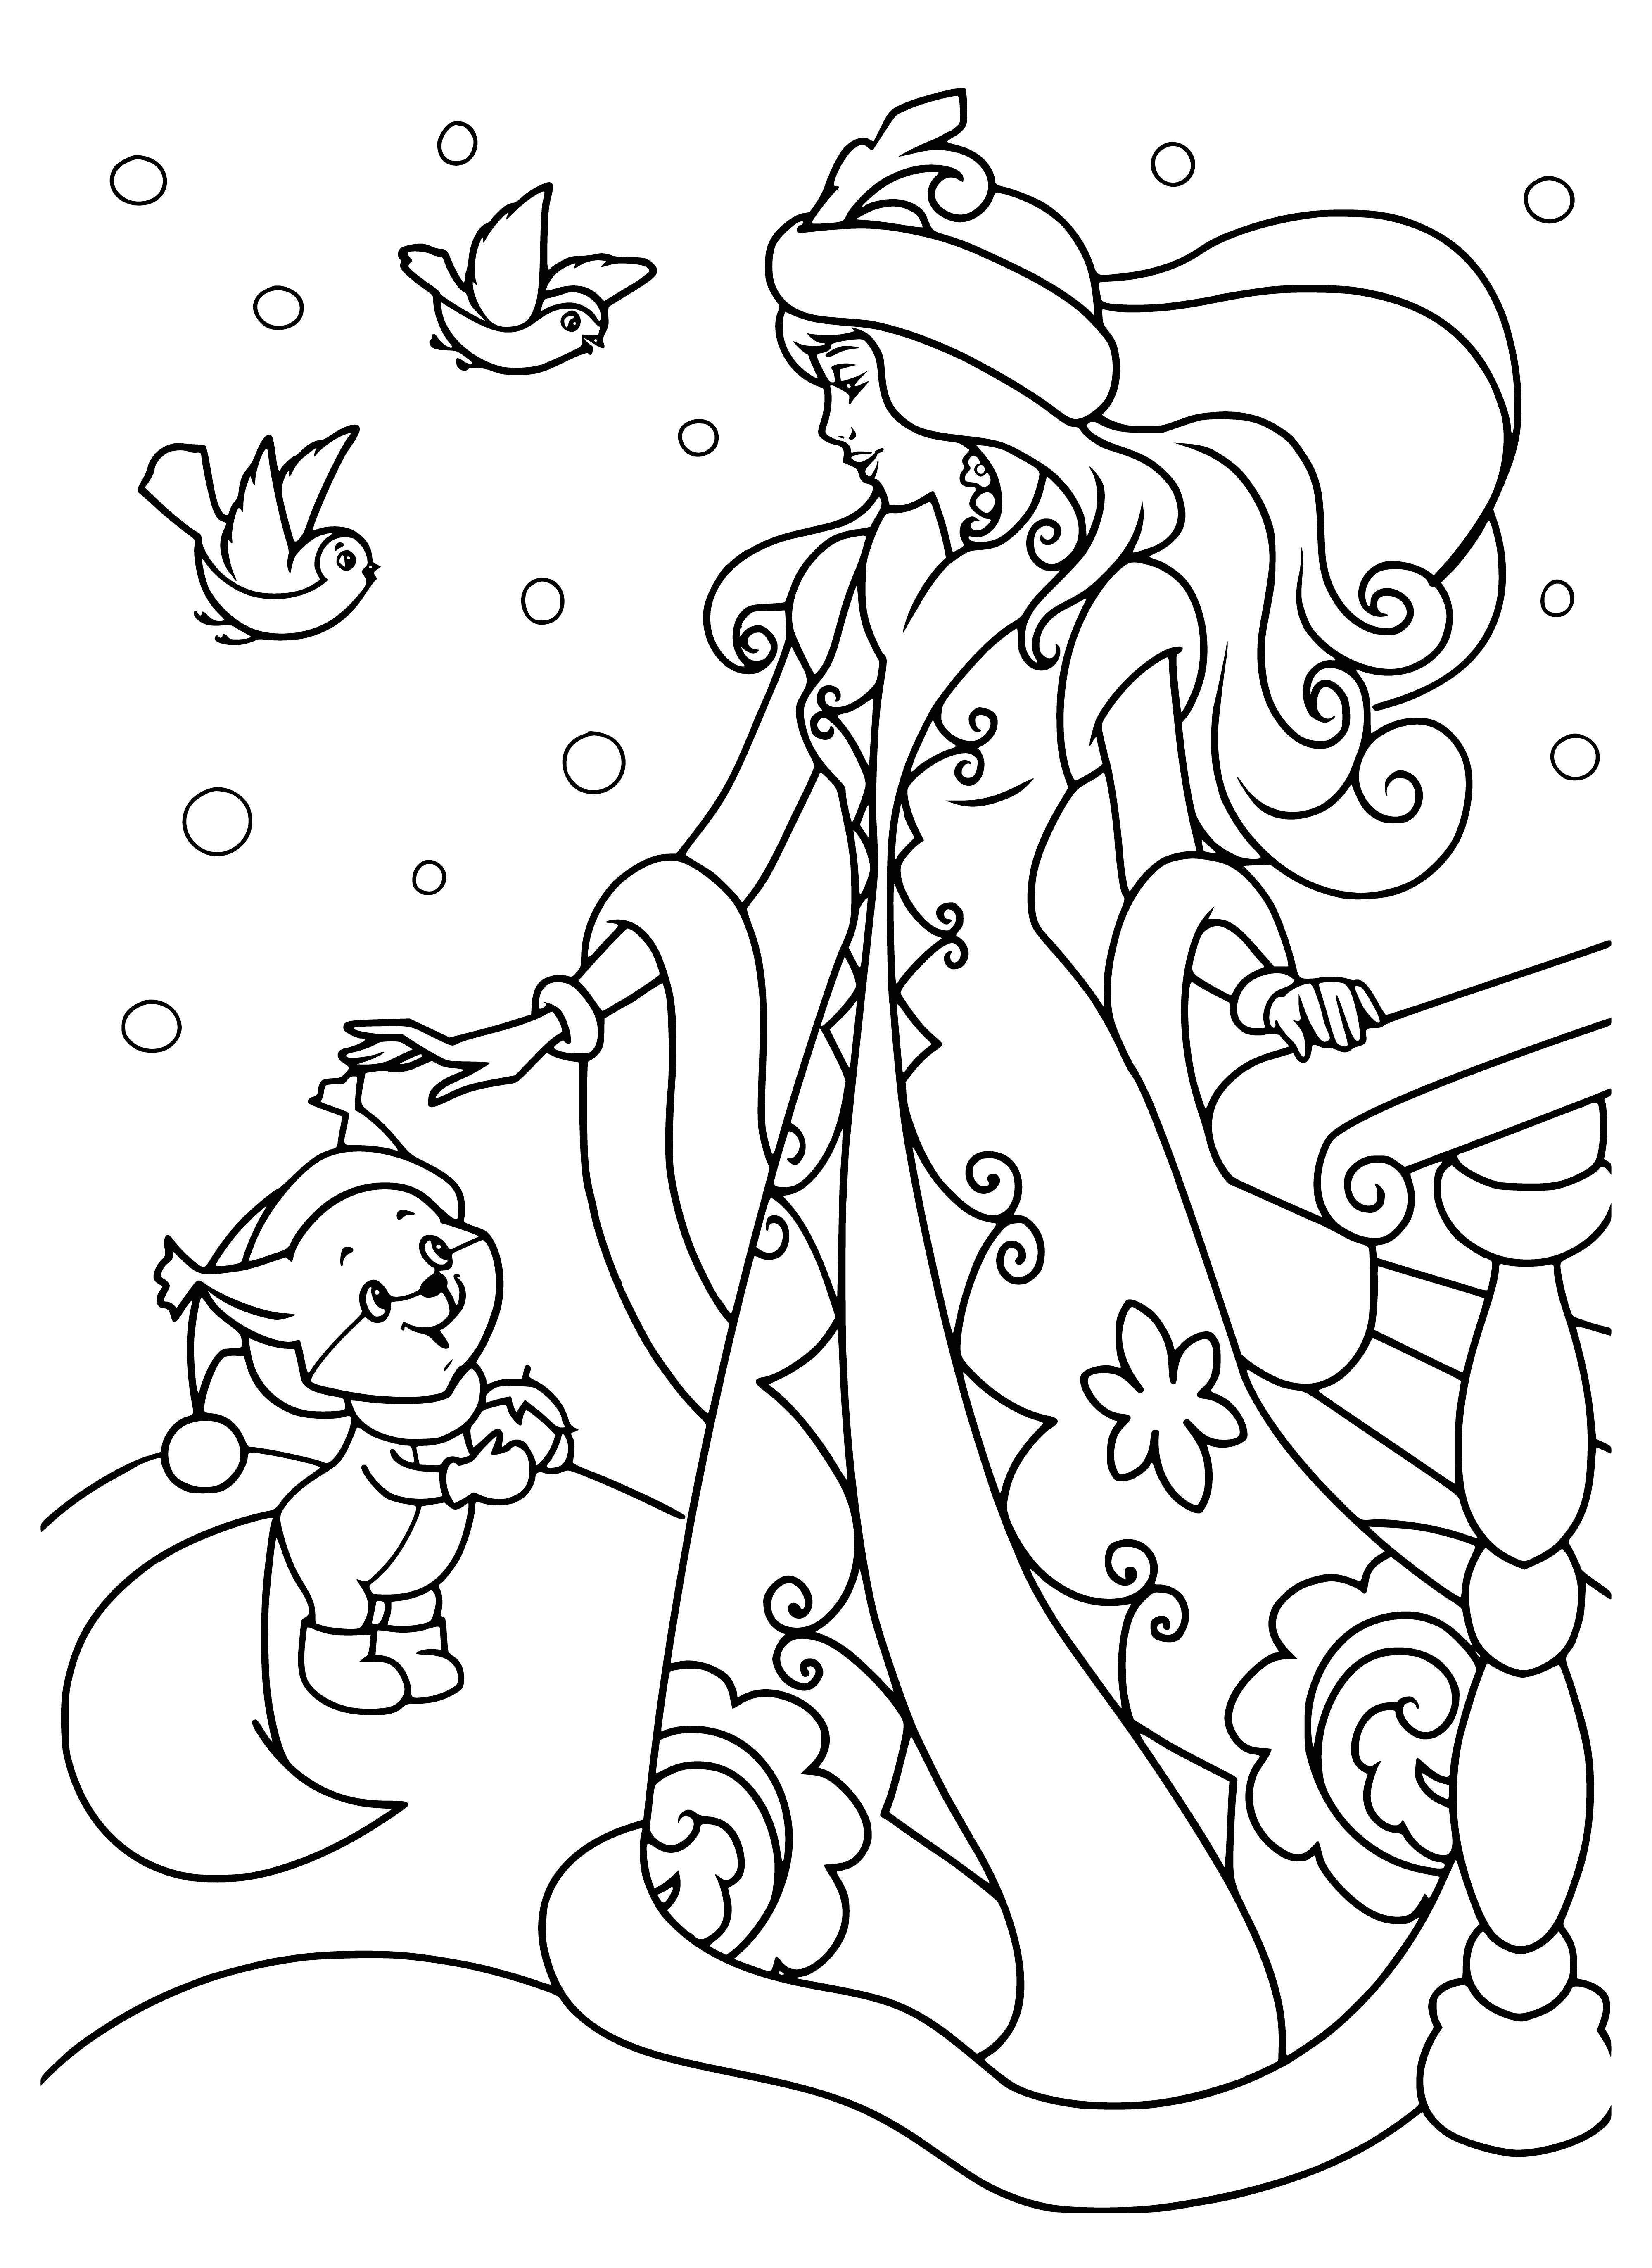 coloring page: Snow Maiden stands in snow w/ blue sky, white coat & scarf, black hair, brown eyes.